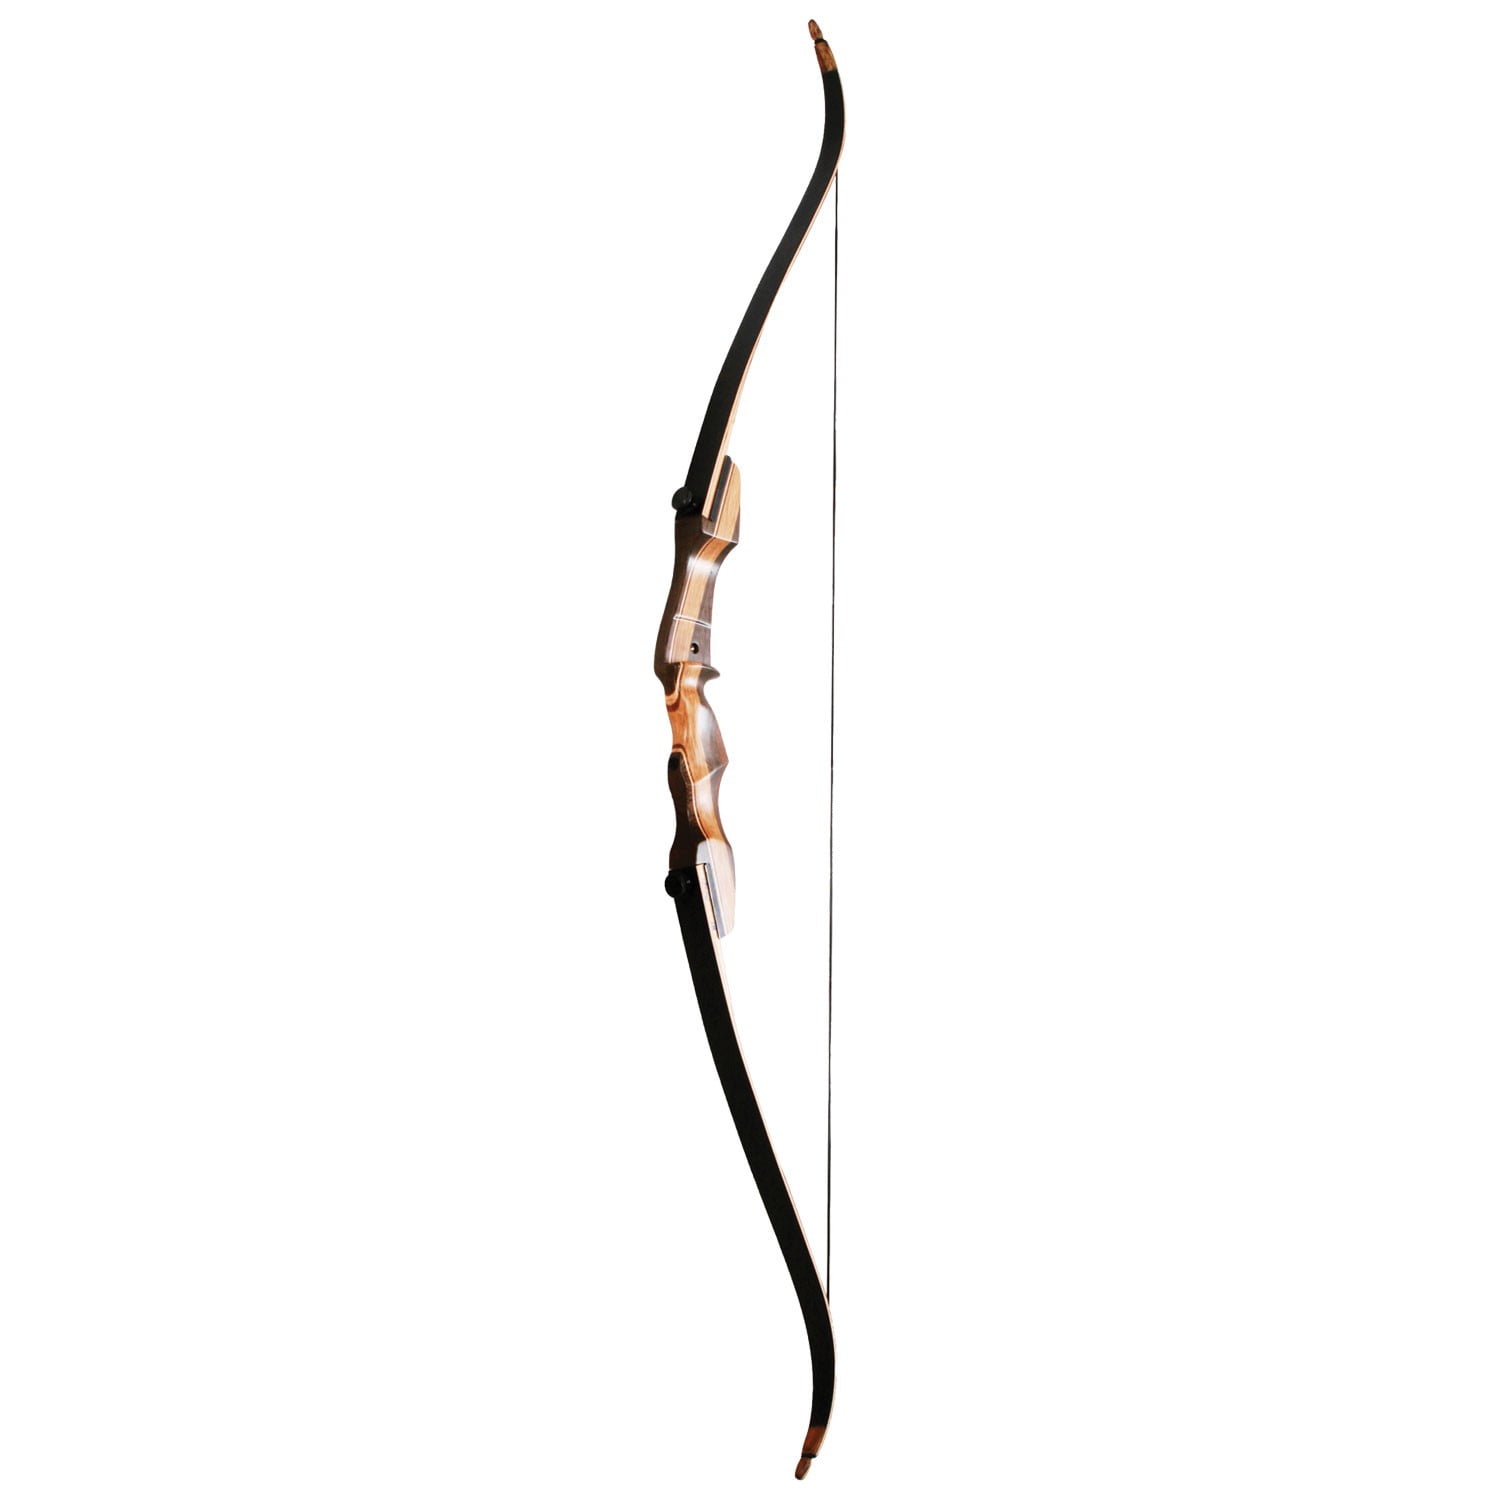 Samick Sage Recurve Bow 30LB Pound Left Hand take down recurve bow new in box 